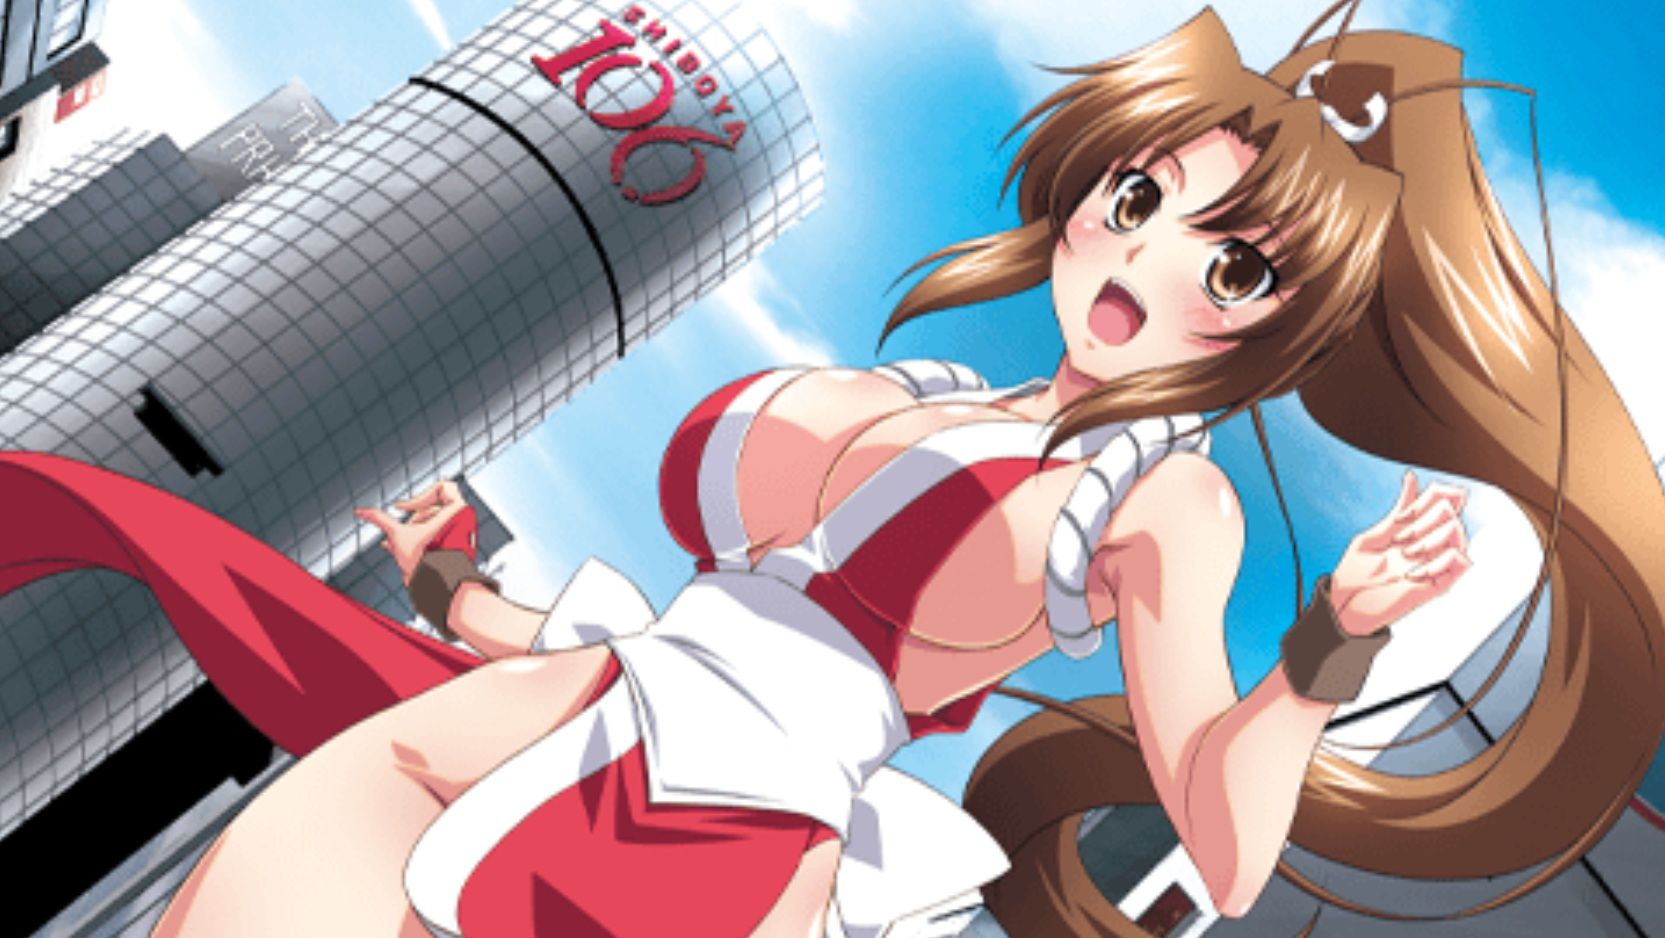 [Image] said Mai Shiranui rated game ever on the best erotic character wwwwwwww 21